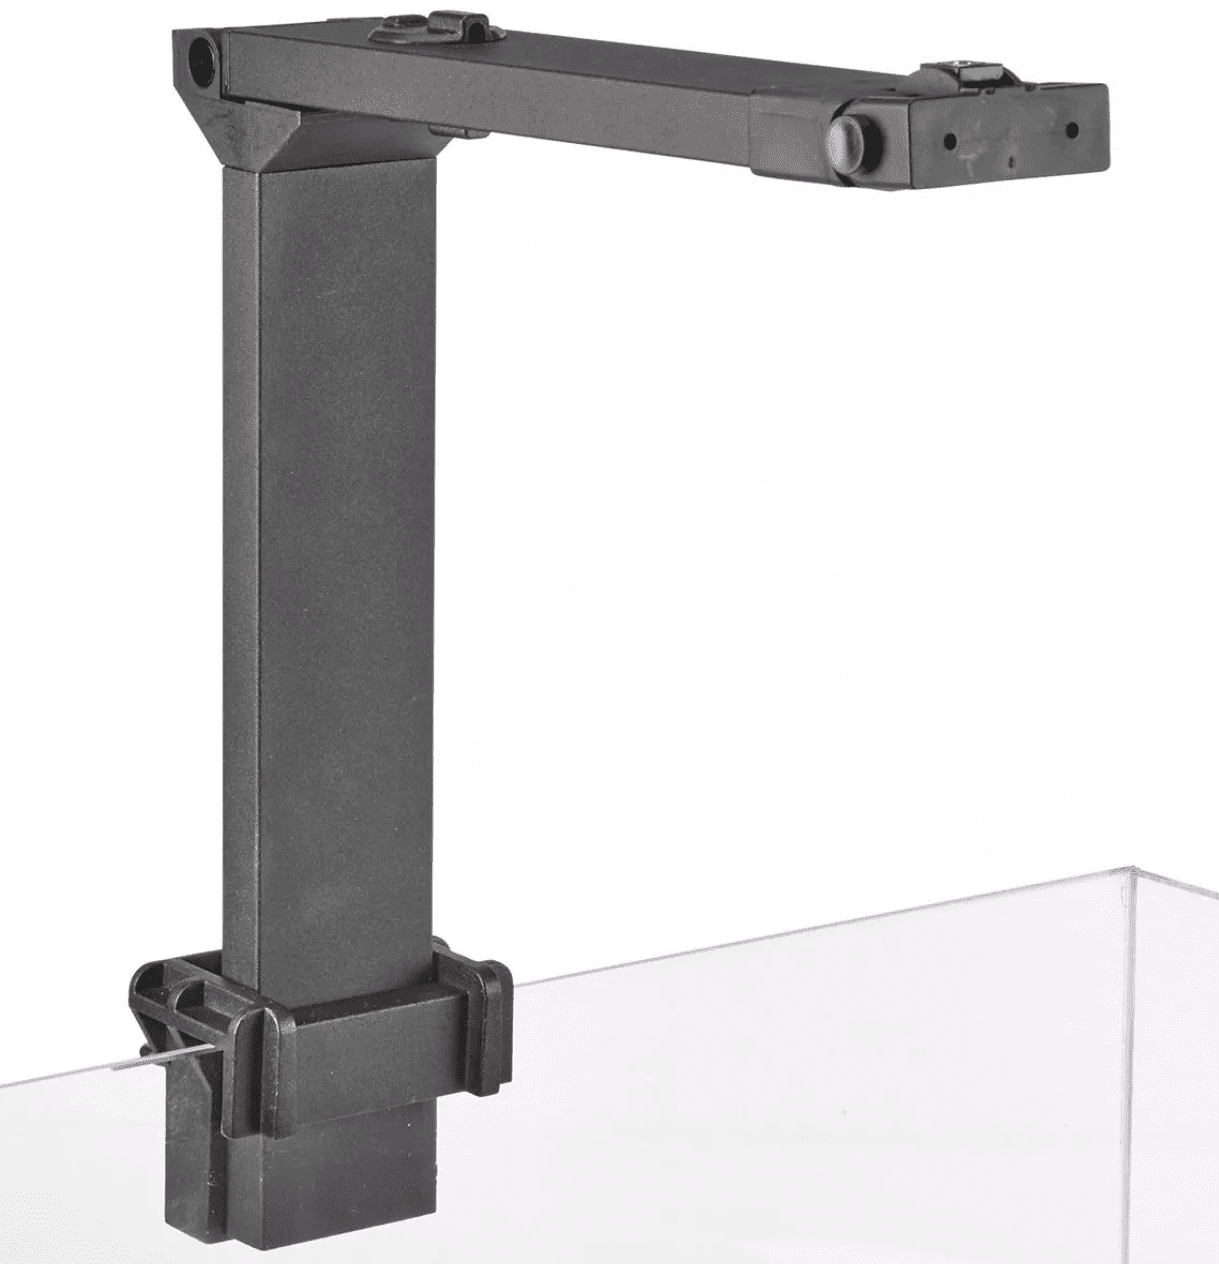 A black metal bracket with a clear glass surface. Perfect for tank-mounted lights on aquariums 18.25" to 27.5" wide. Easy assembly and removal.